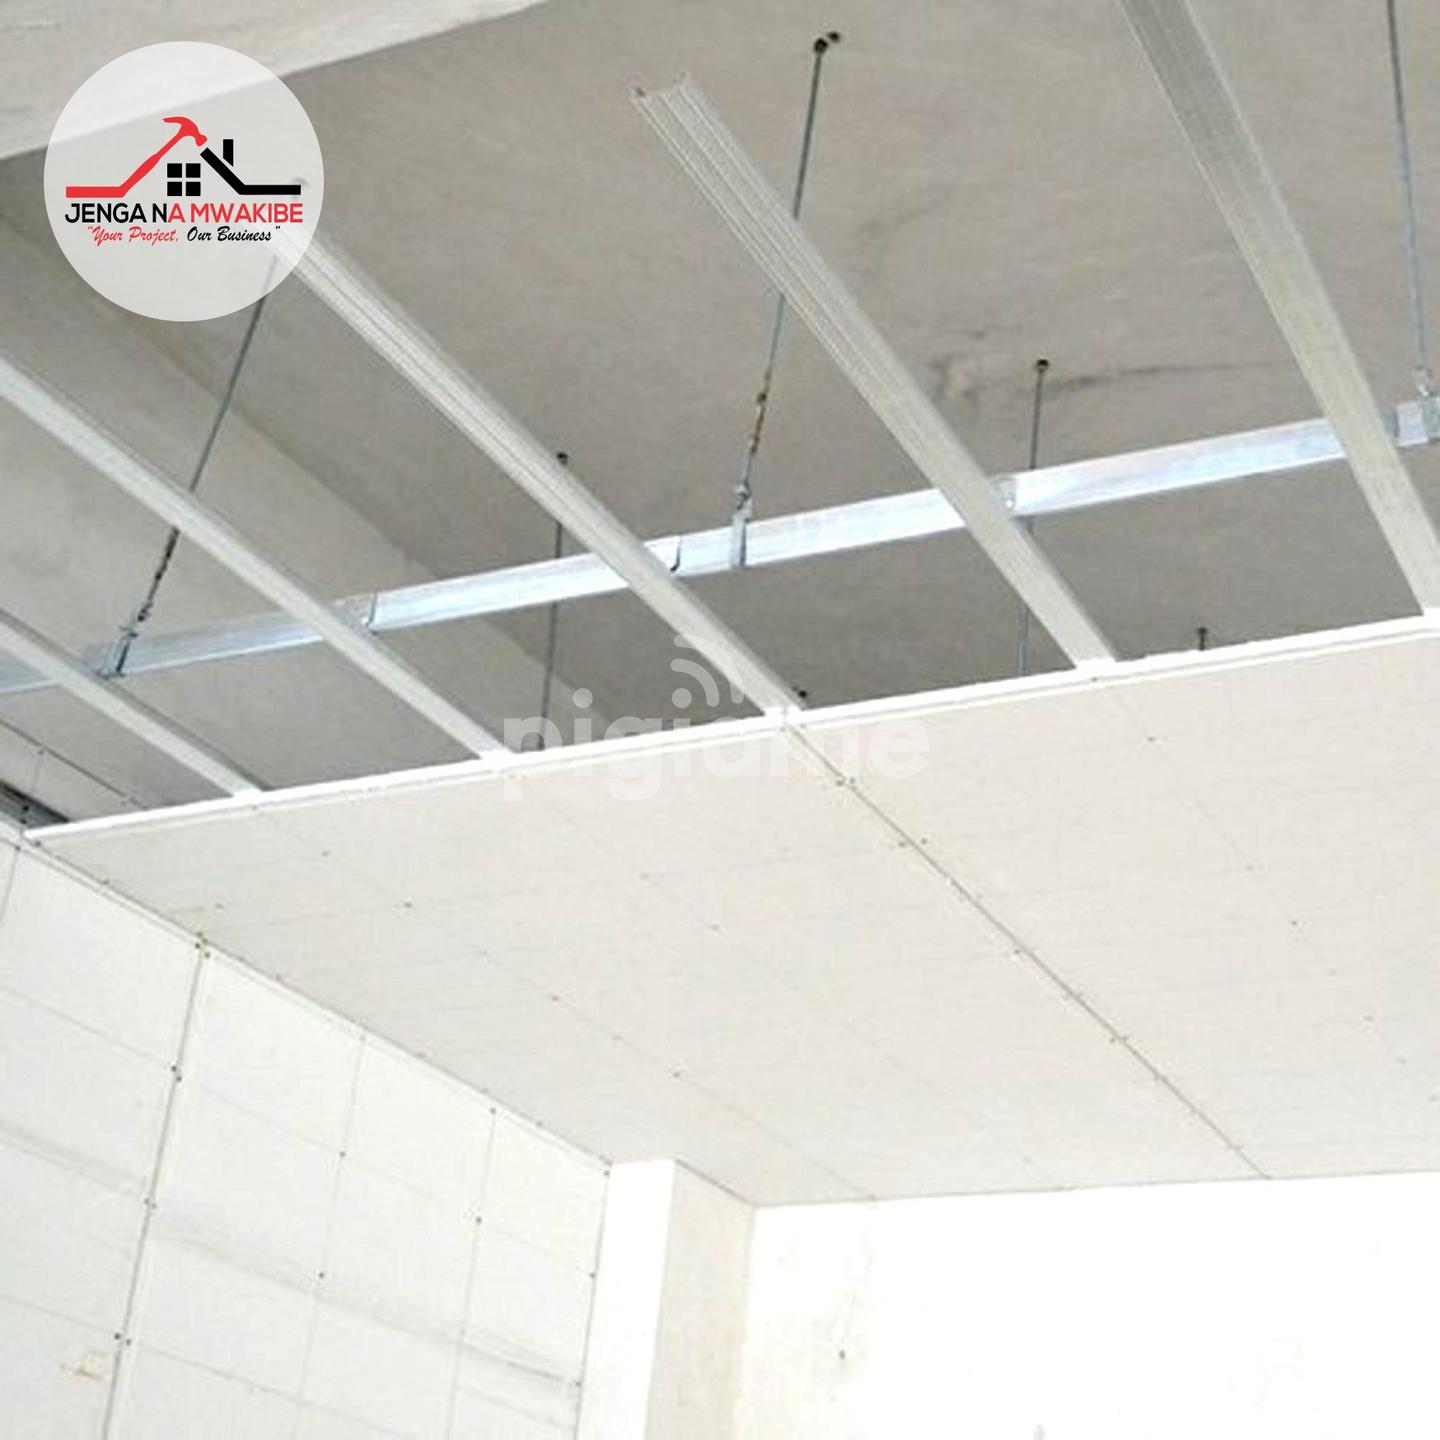 Blundering Studs and Channels for Gypsum Ceiling Designs in